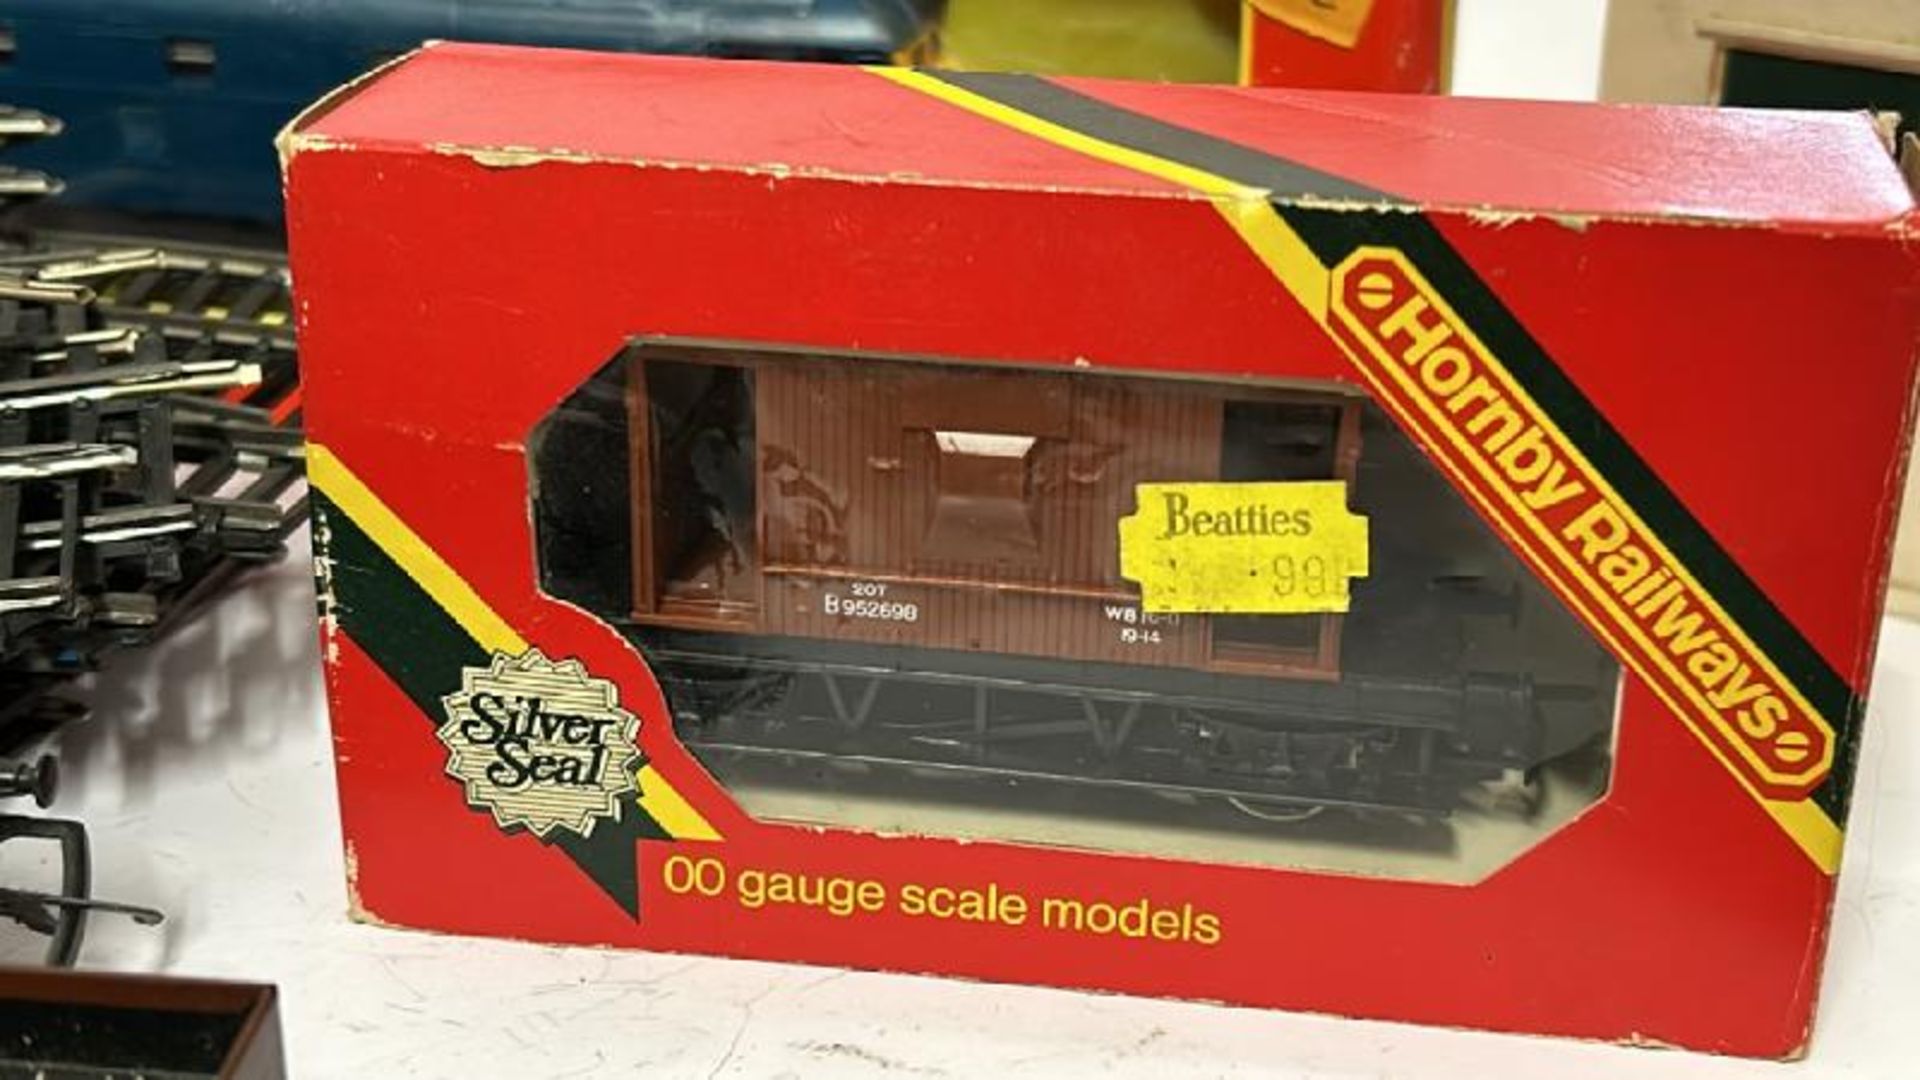 Collection of model trains, track and accessories including Hornby diesel engine D5572, figures, - Image 3 of 10